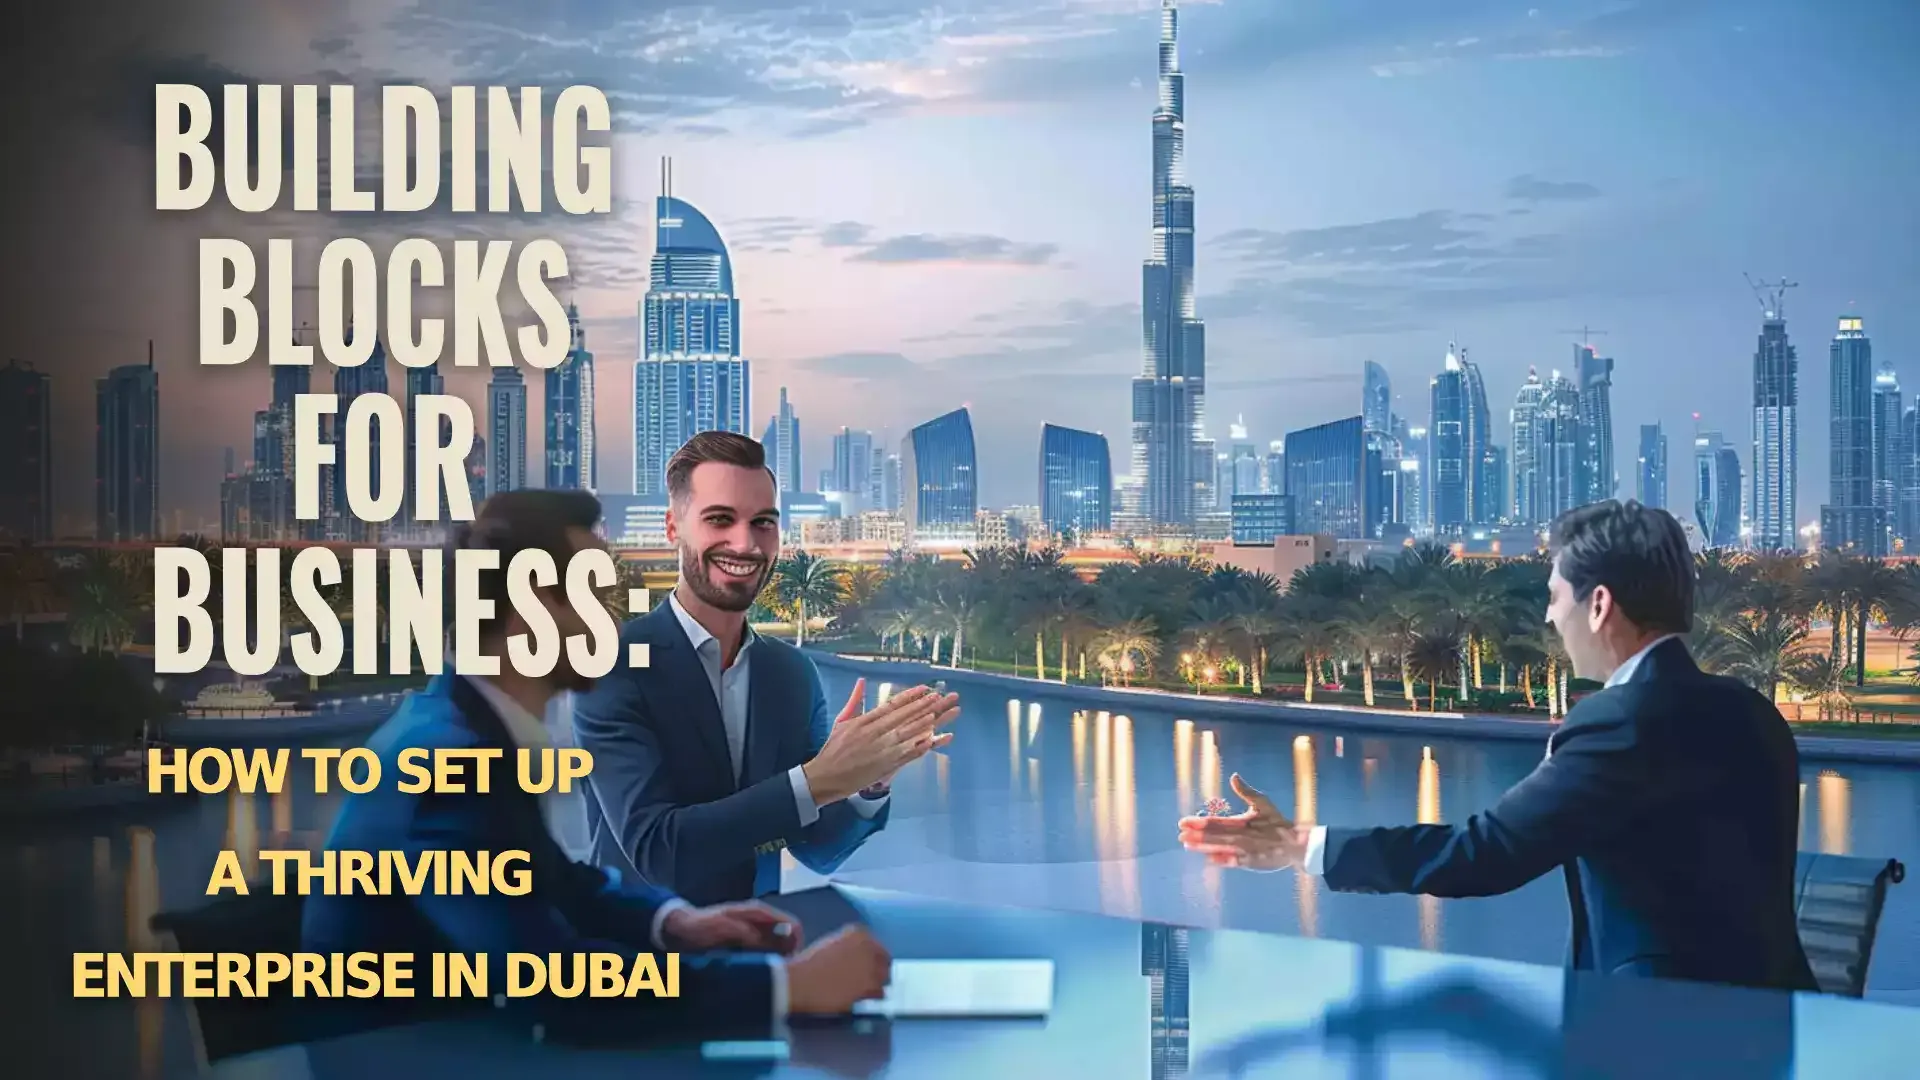 Image: Expert Guide to Setting Up a Business in Dubai